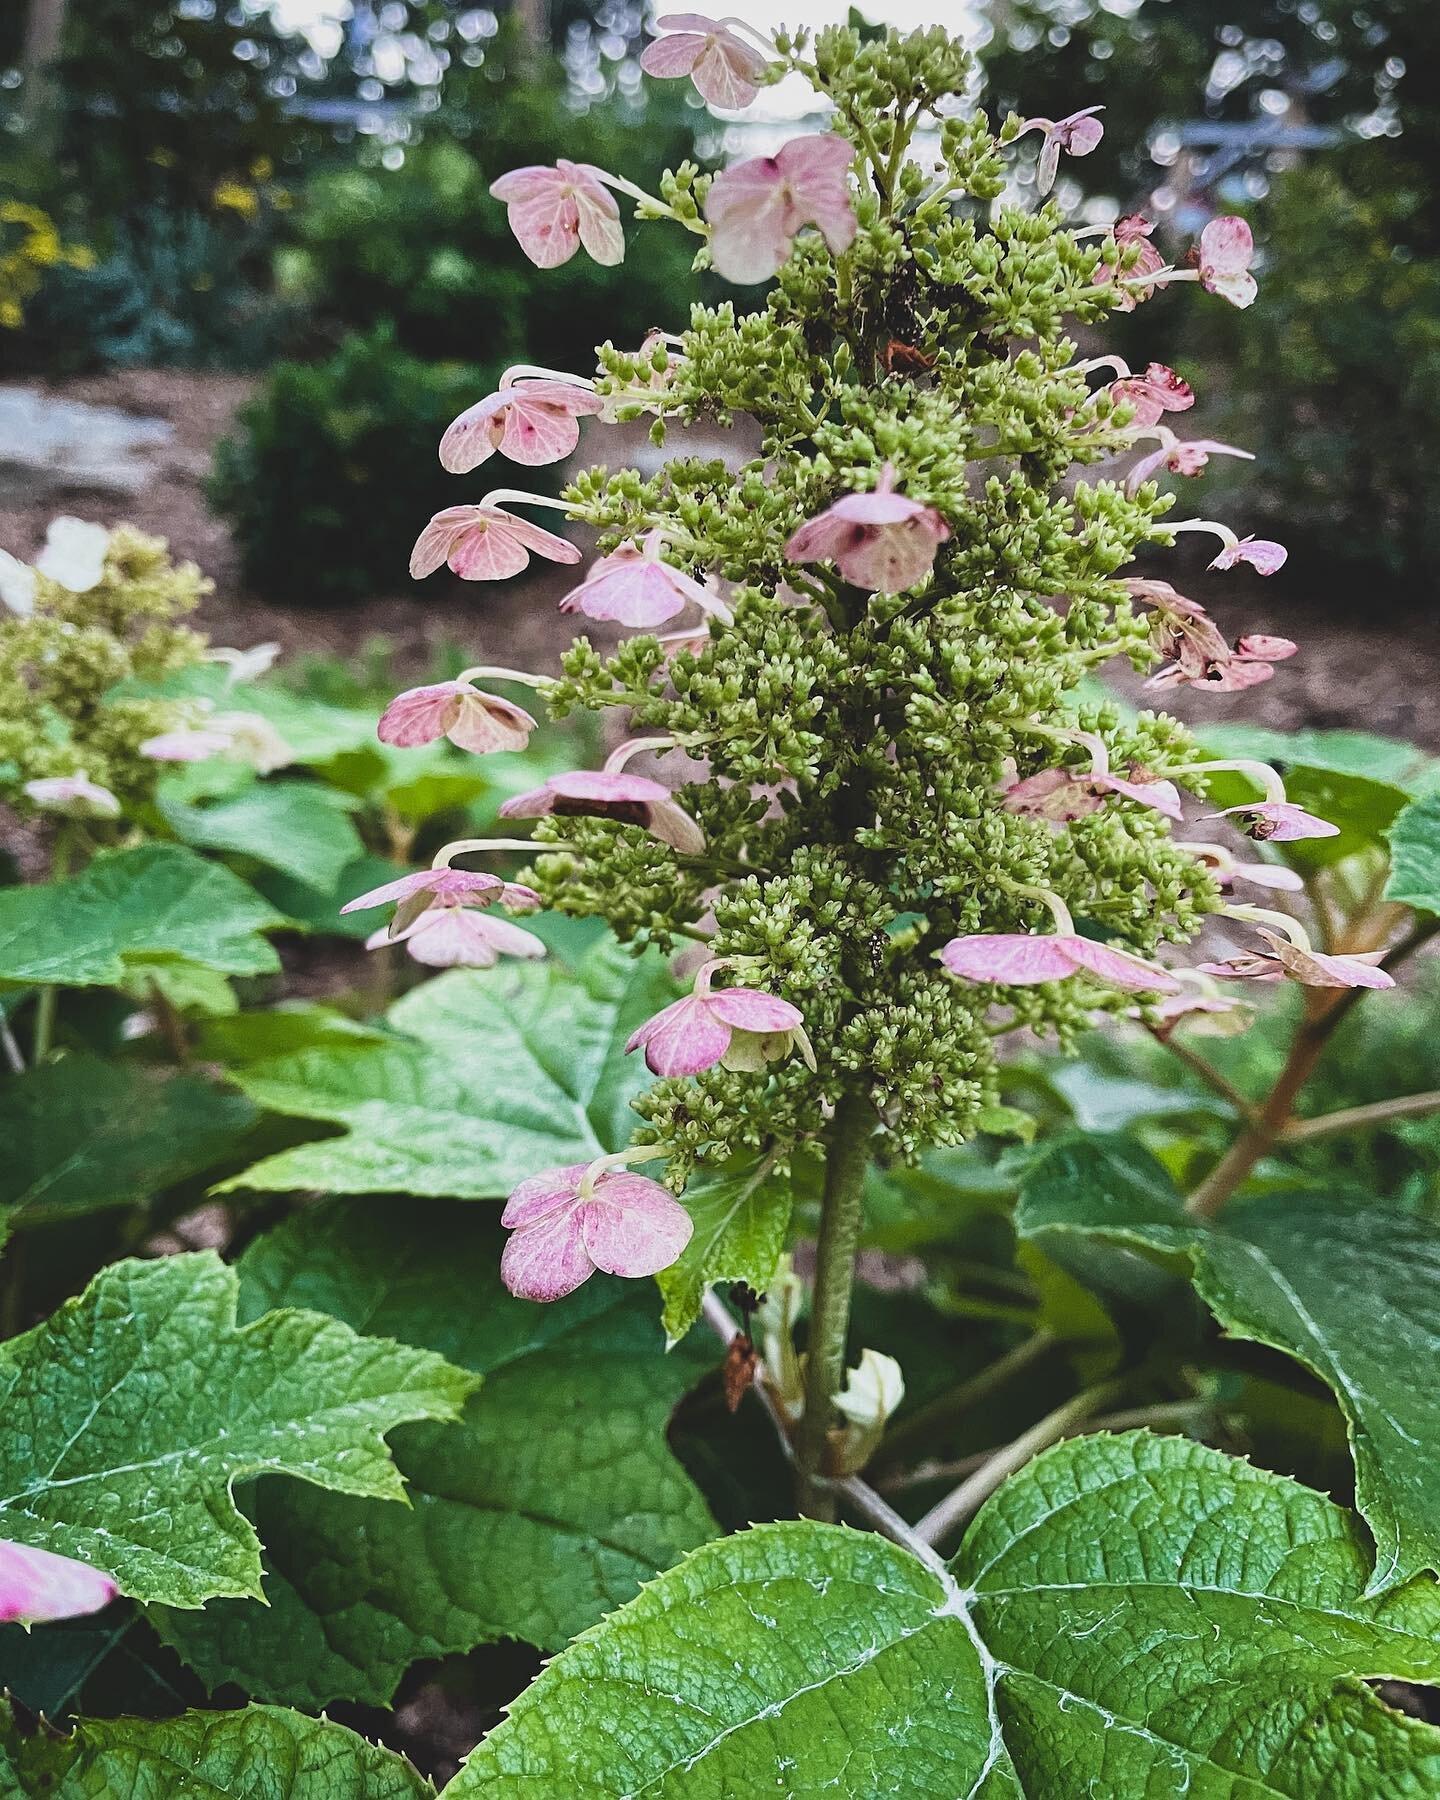 ❤️ HYDRANGEAS ❤️

I have 4 varieties (and different sub varietals in them by size) of hydrangea in my garden. And they are all coming into bloom. I love each one for different reasons, and absolutely IN LOVE with all of them! Swipe to see the flowers